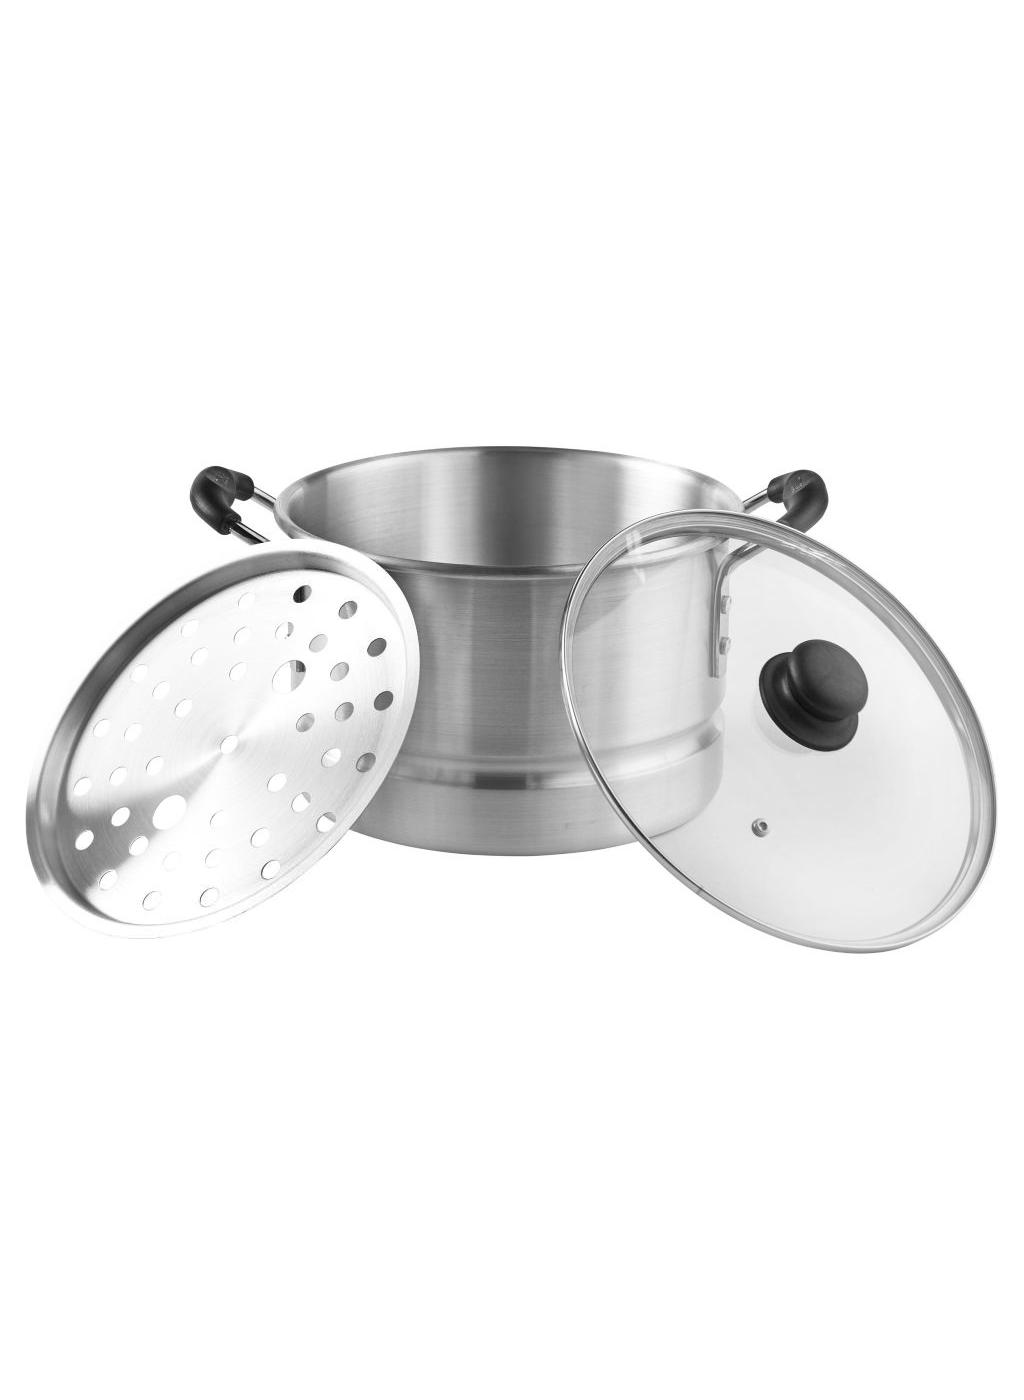 Cocinaware Teal Tamale Steamer with Glass Lid - Shop Stock Pots & Sauce Pans  at H-E-B